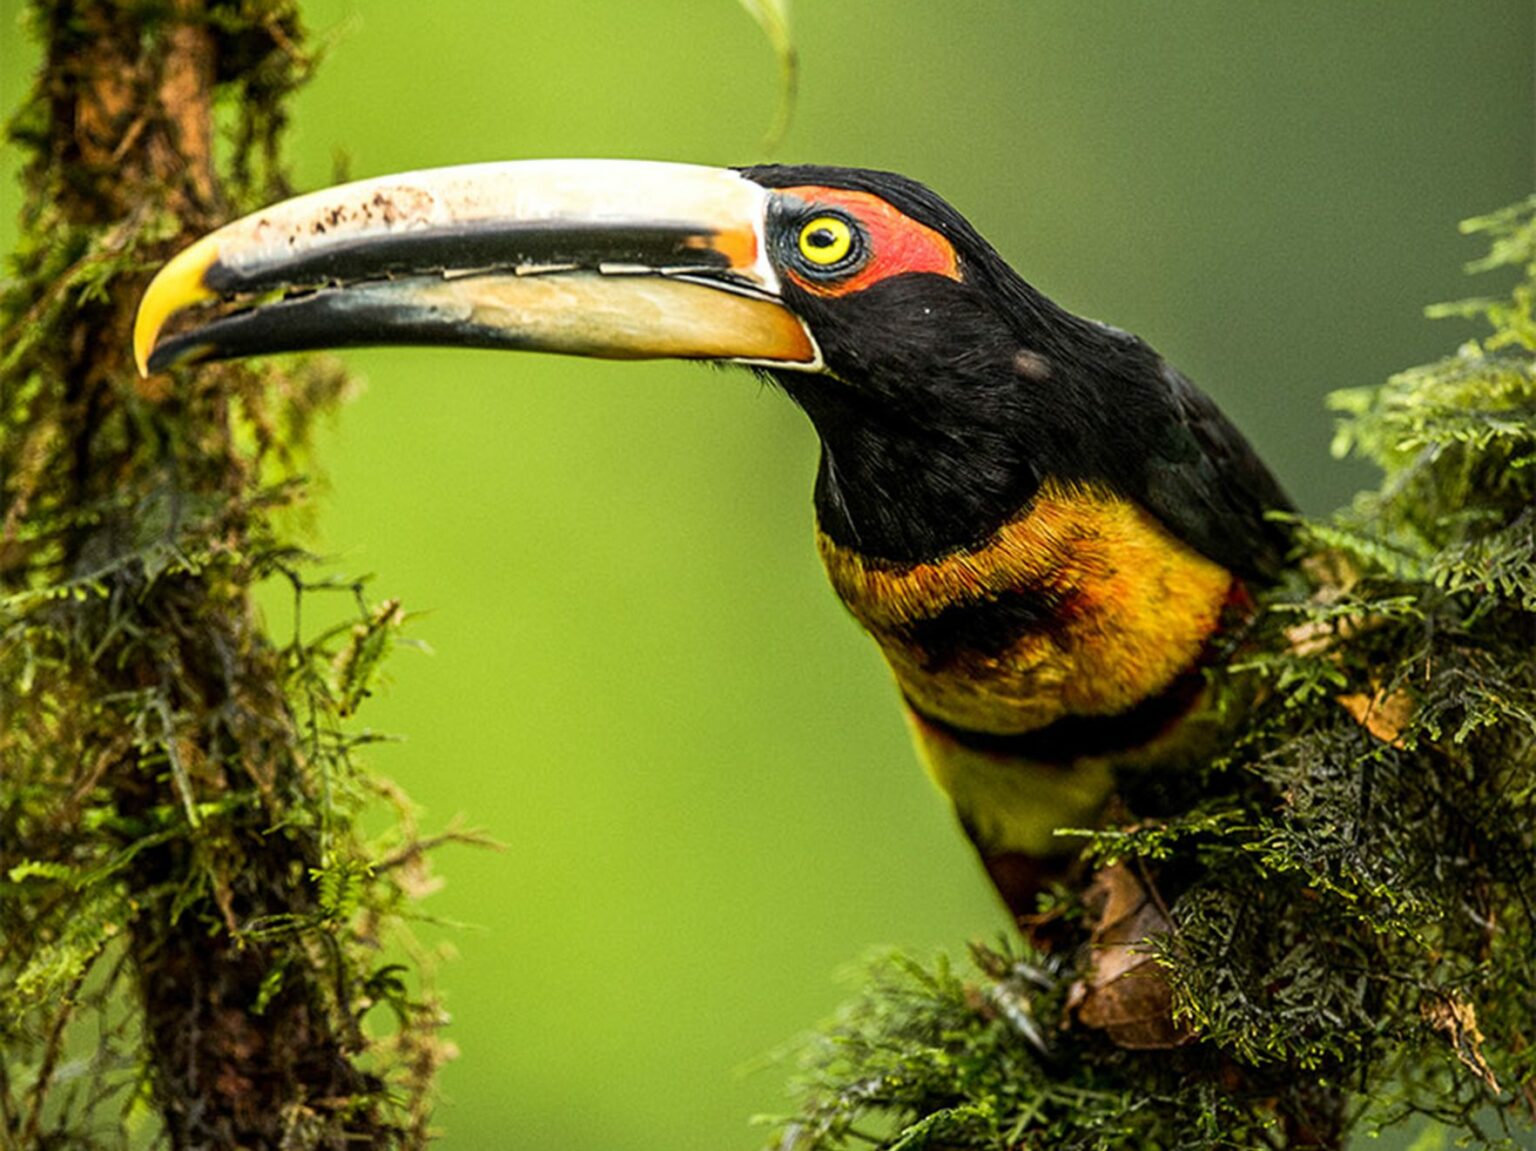 A bird with a long beak sitting on a tree branch.